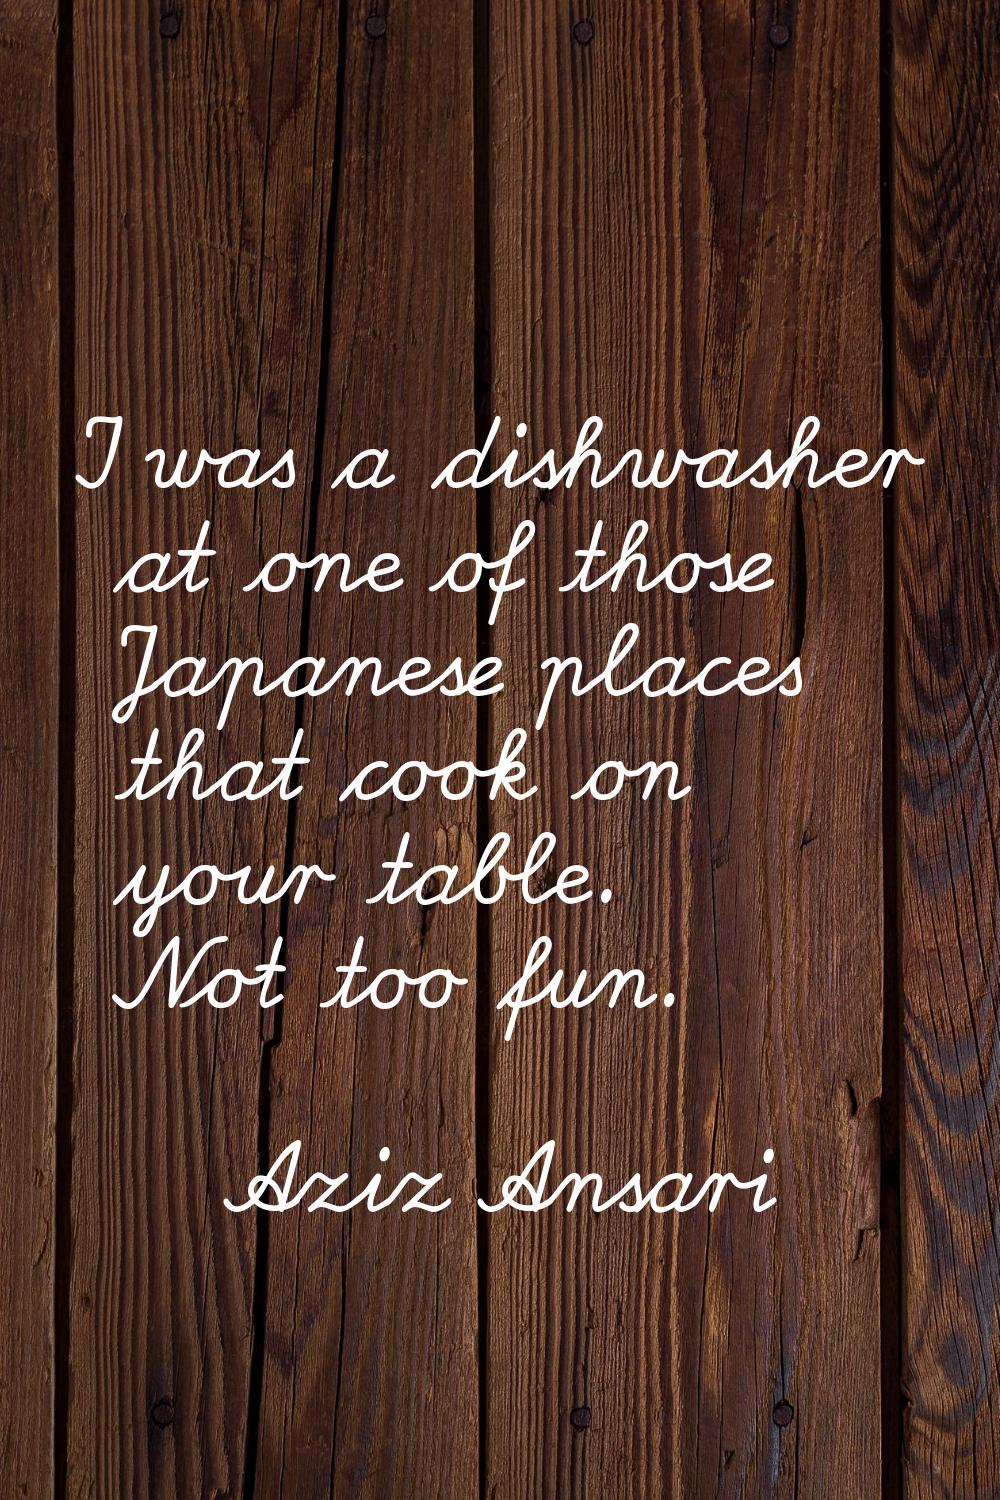 I was a dishwasher at one of those Japanese places that cook on your table. Not too fun.